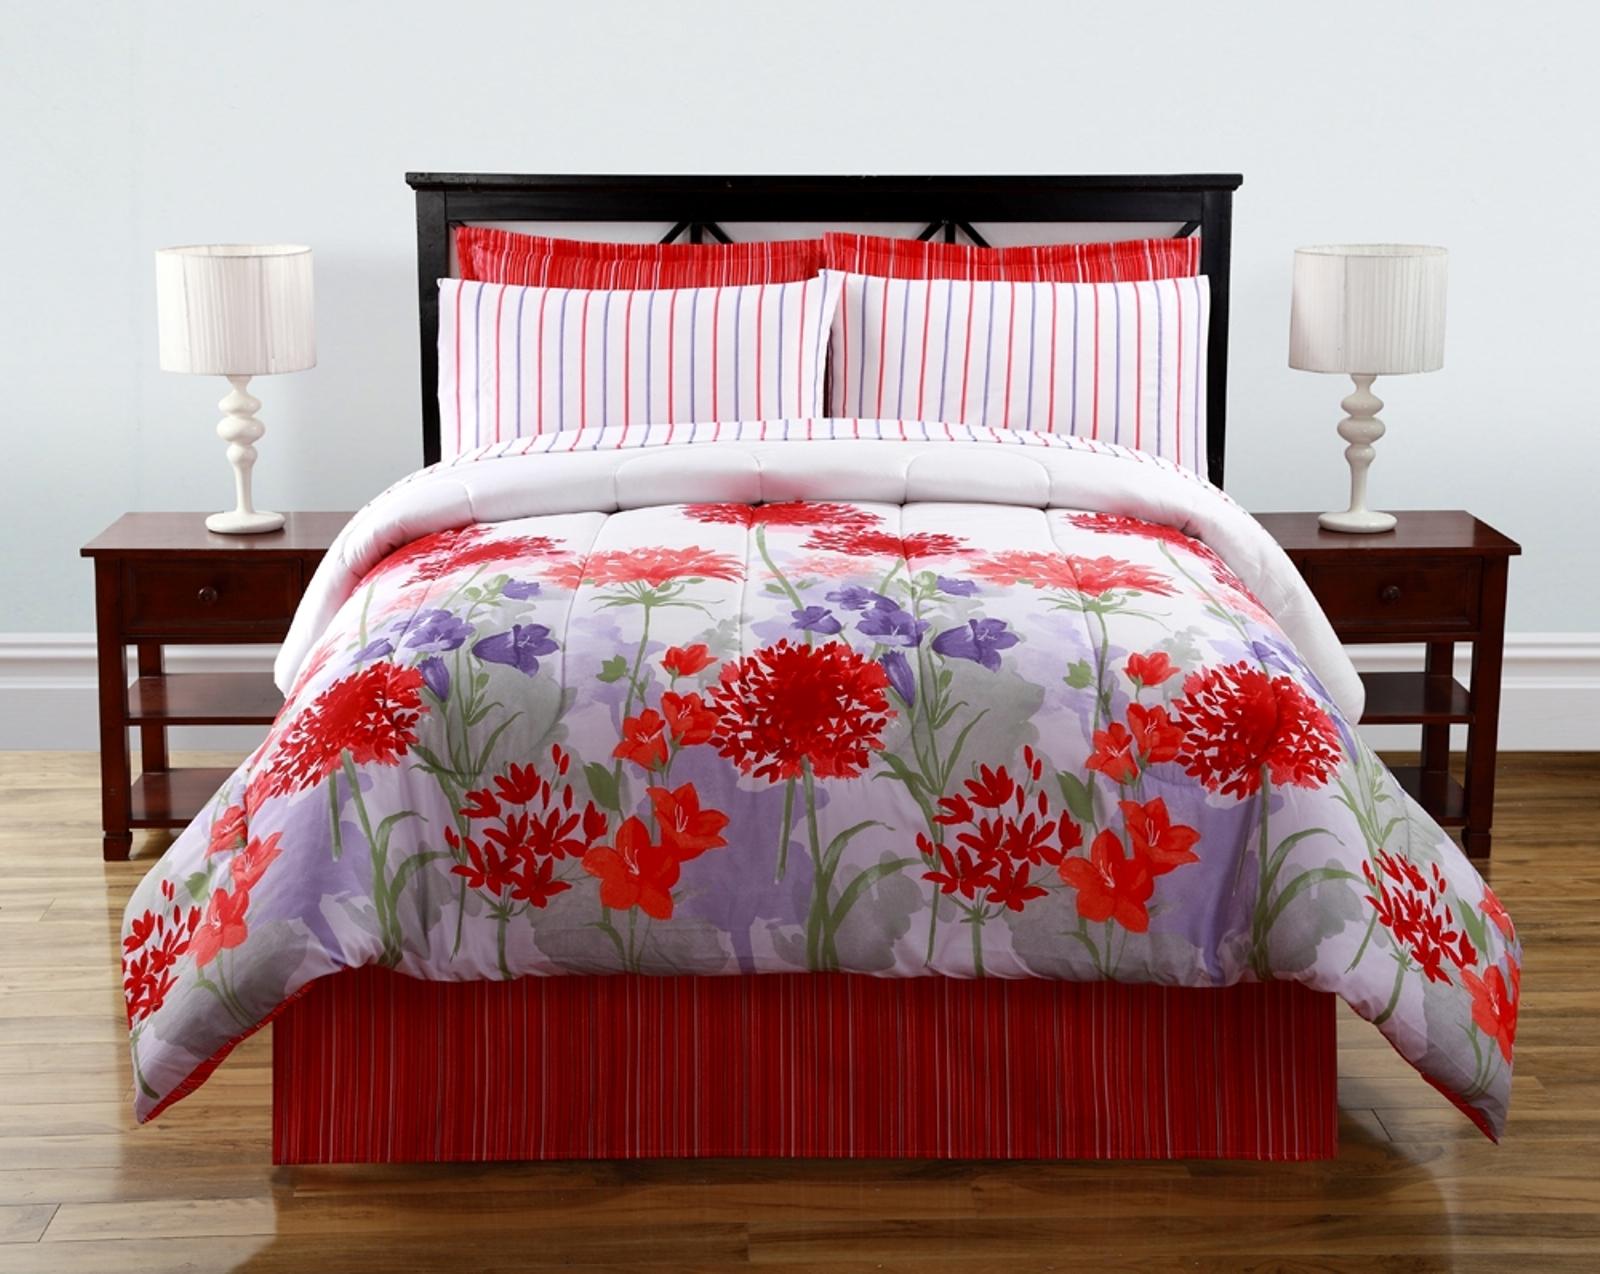 Complete Bed Set - Floral Meadow